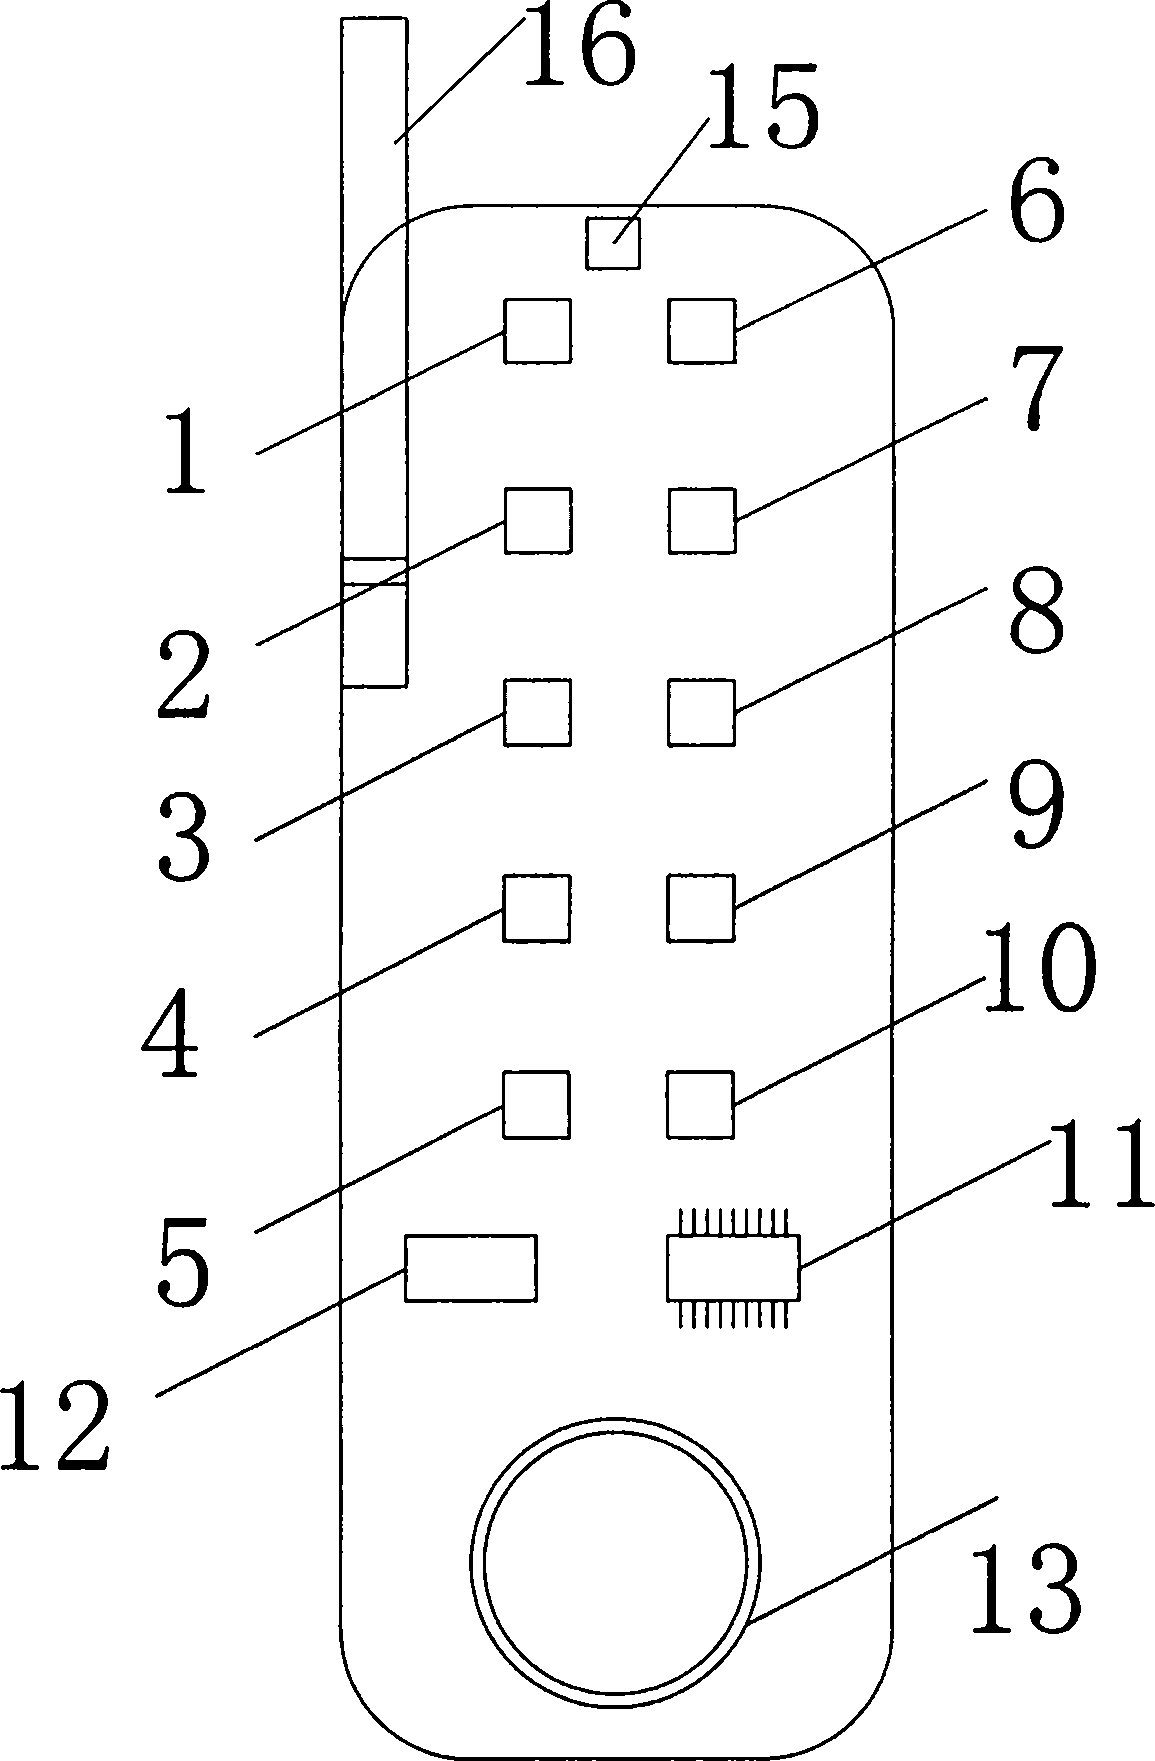 Non-contact remote control learning method and system